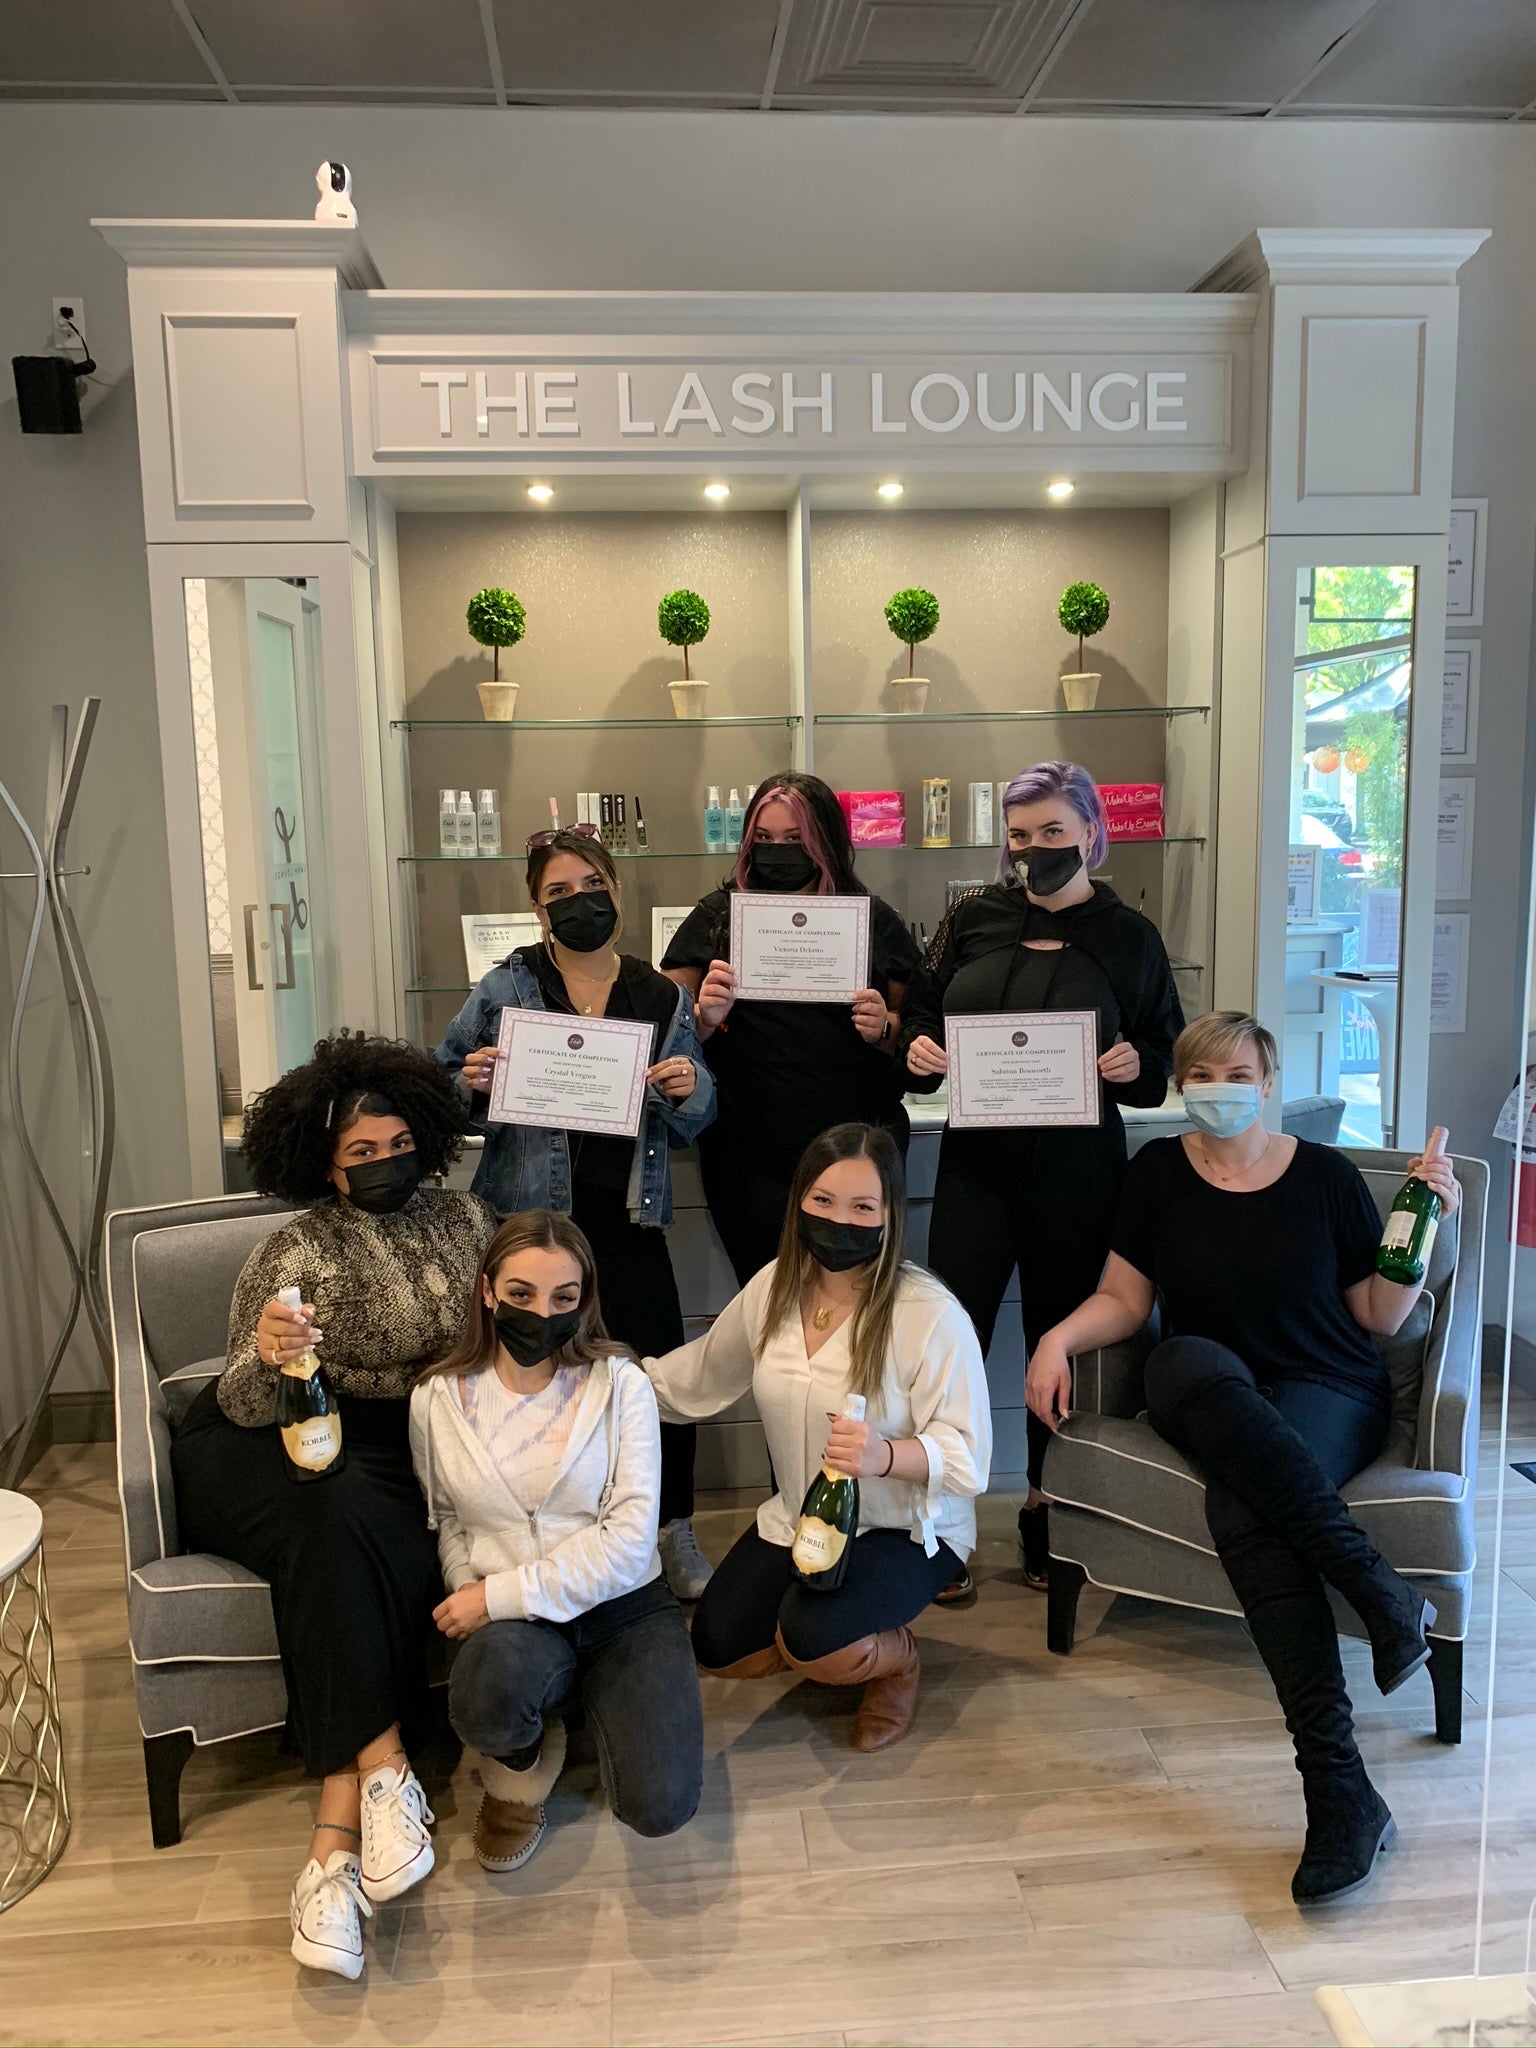 The Lash Lounge Summit – Downtown's staff posing together as a group.